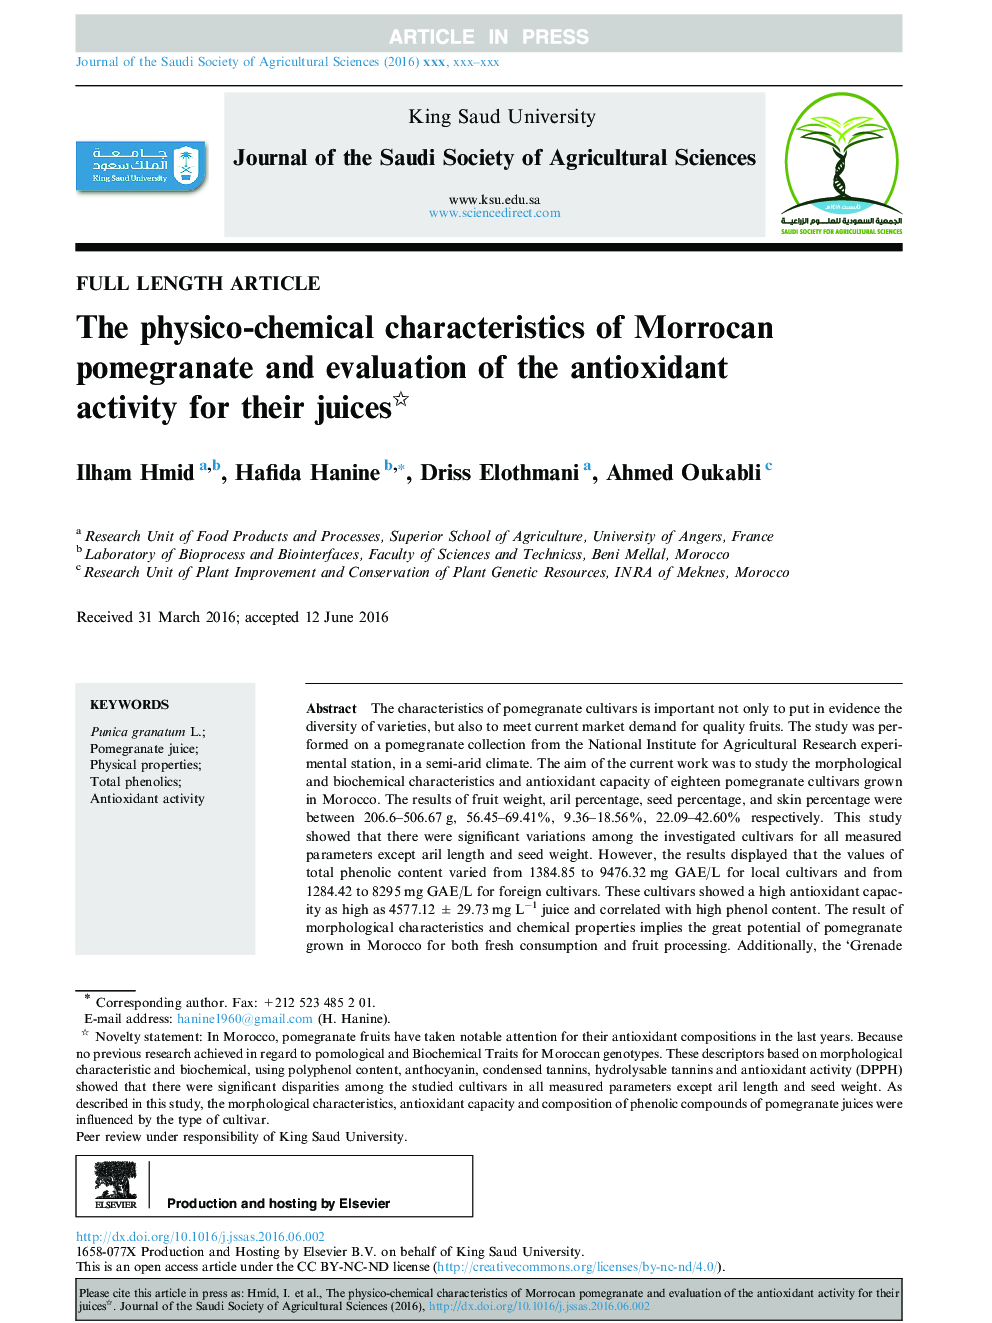 The physico-chemical characteristics of Morrocan pomegranate and evaluation of the antioxidant activity for their juices